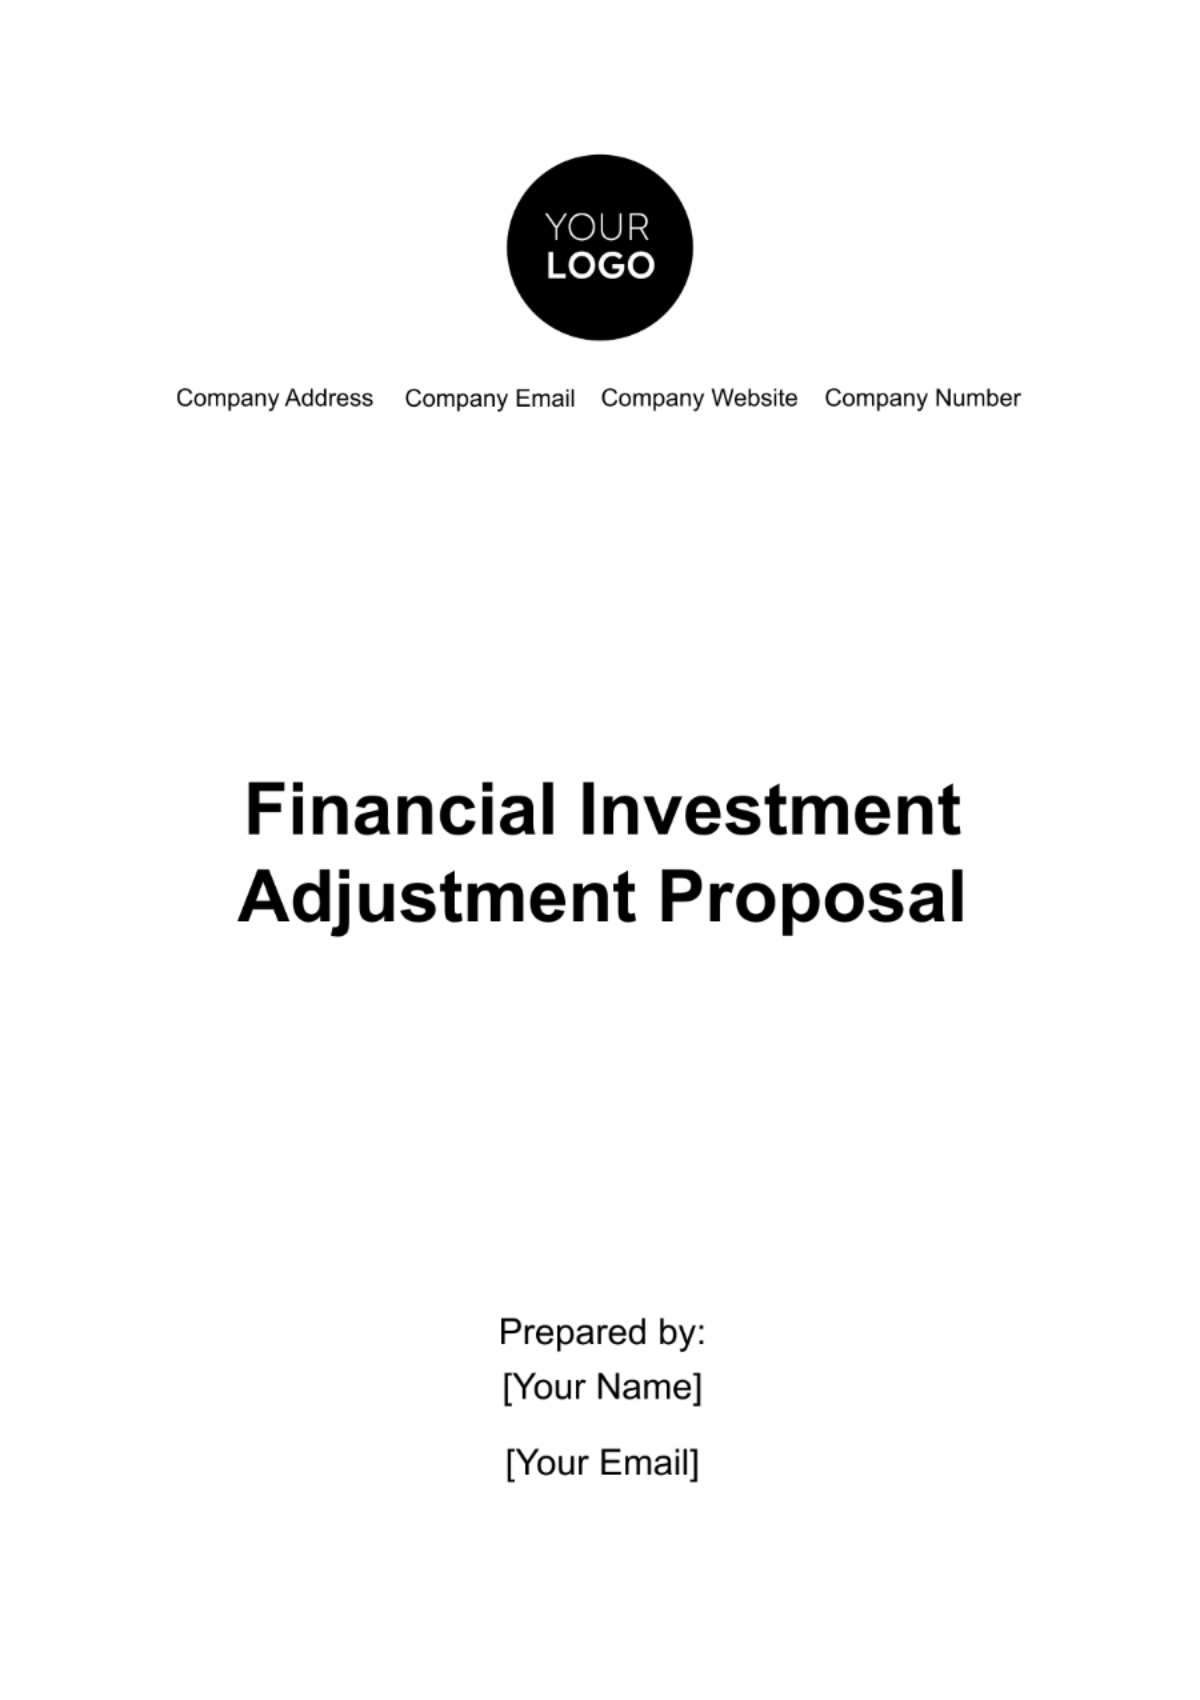 Financial Investment Adjustment Proposal Template